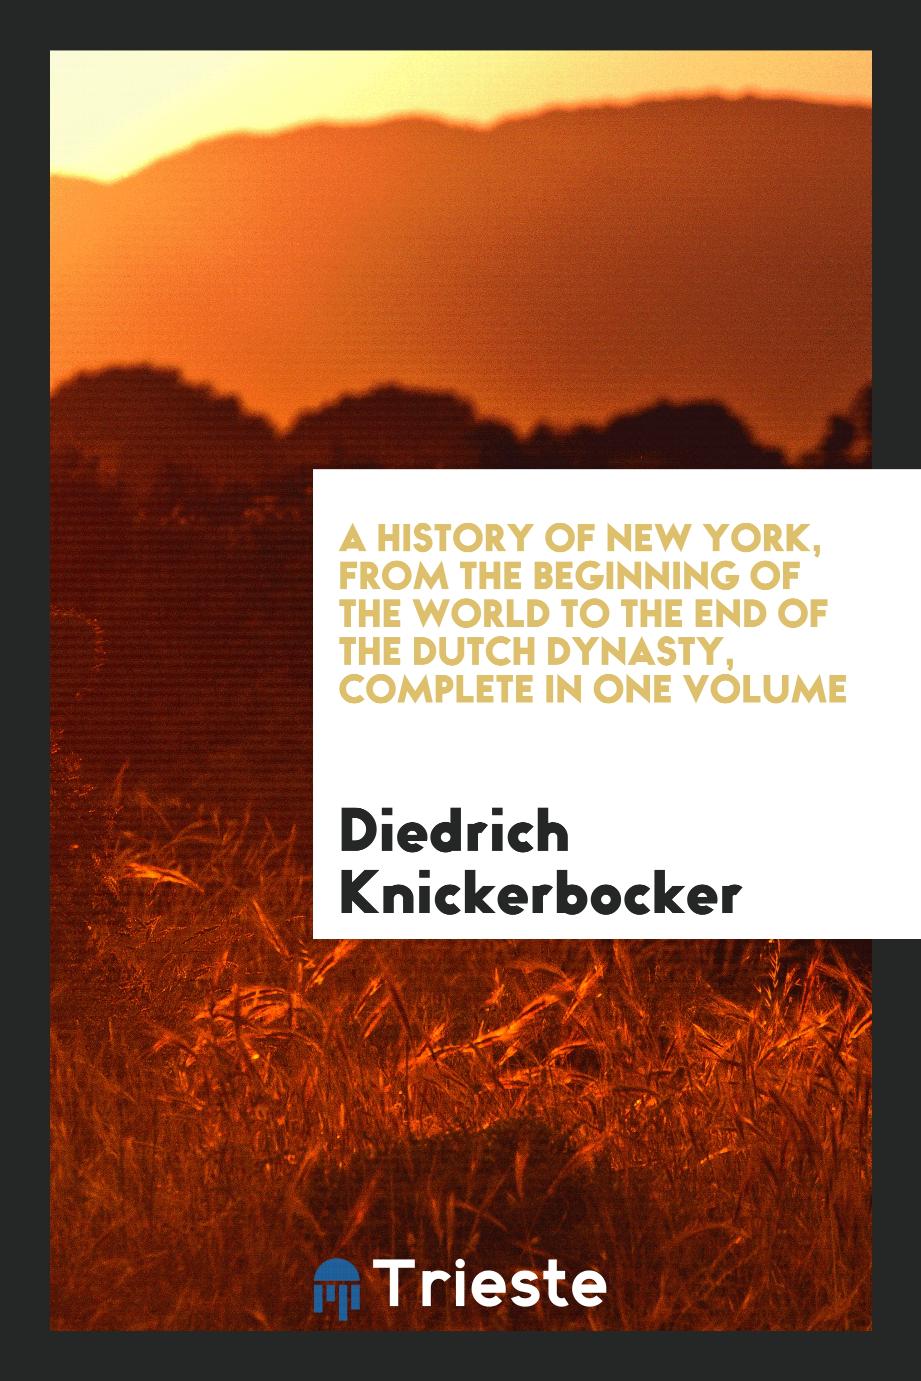 A History of New York, from the Beginning of the World to the End of the Dutch Dynasty, Complete in One Volume